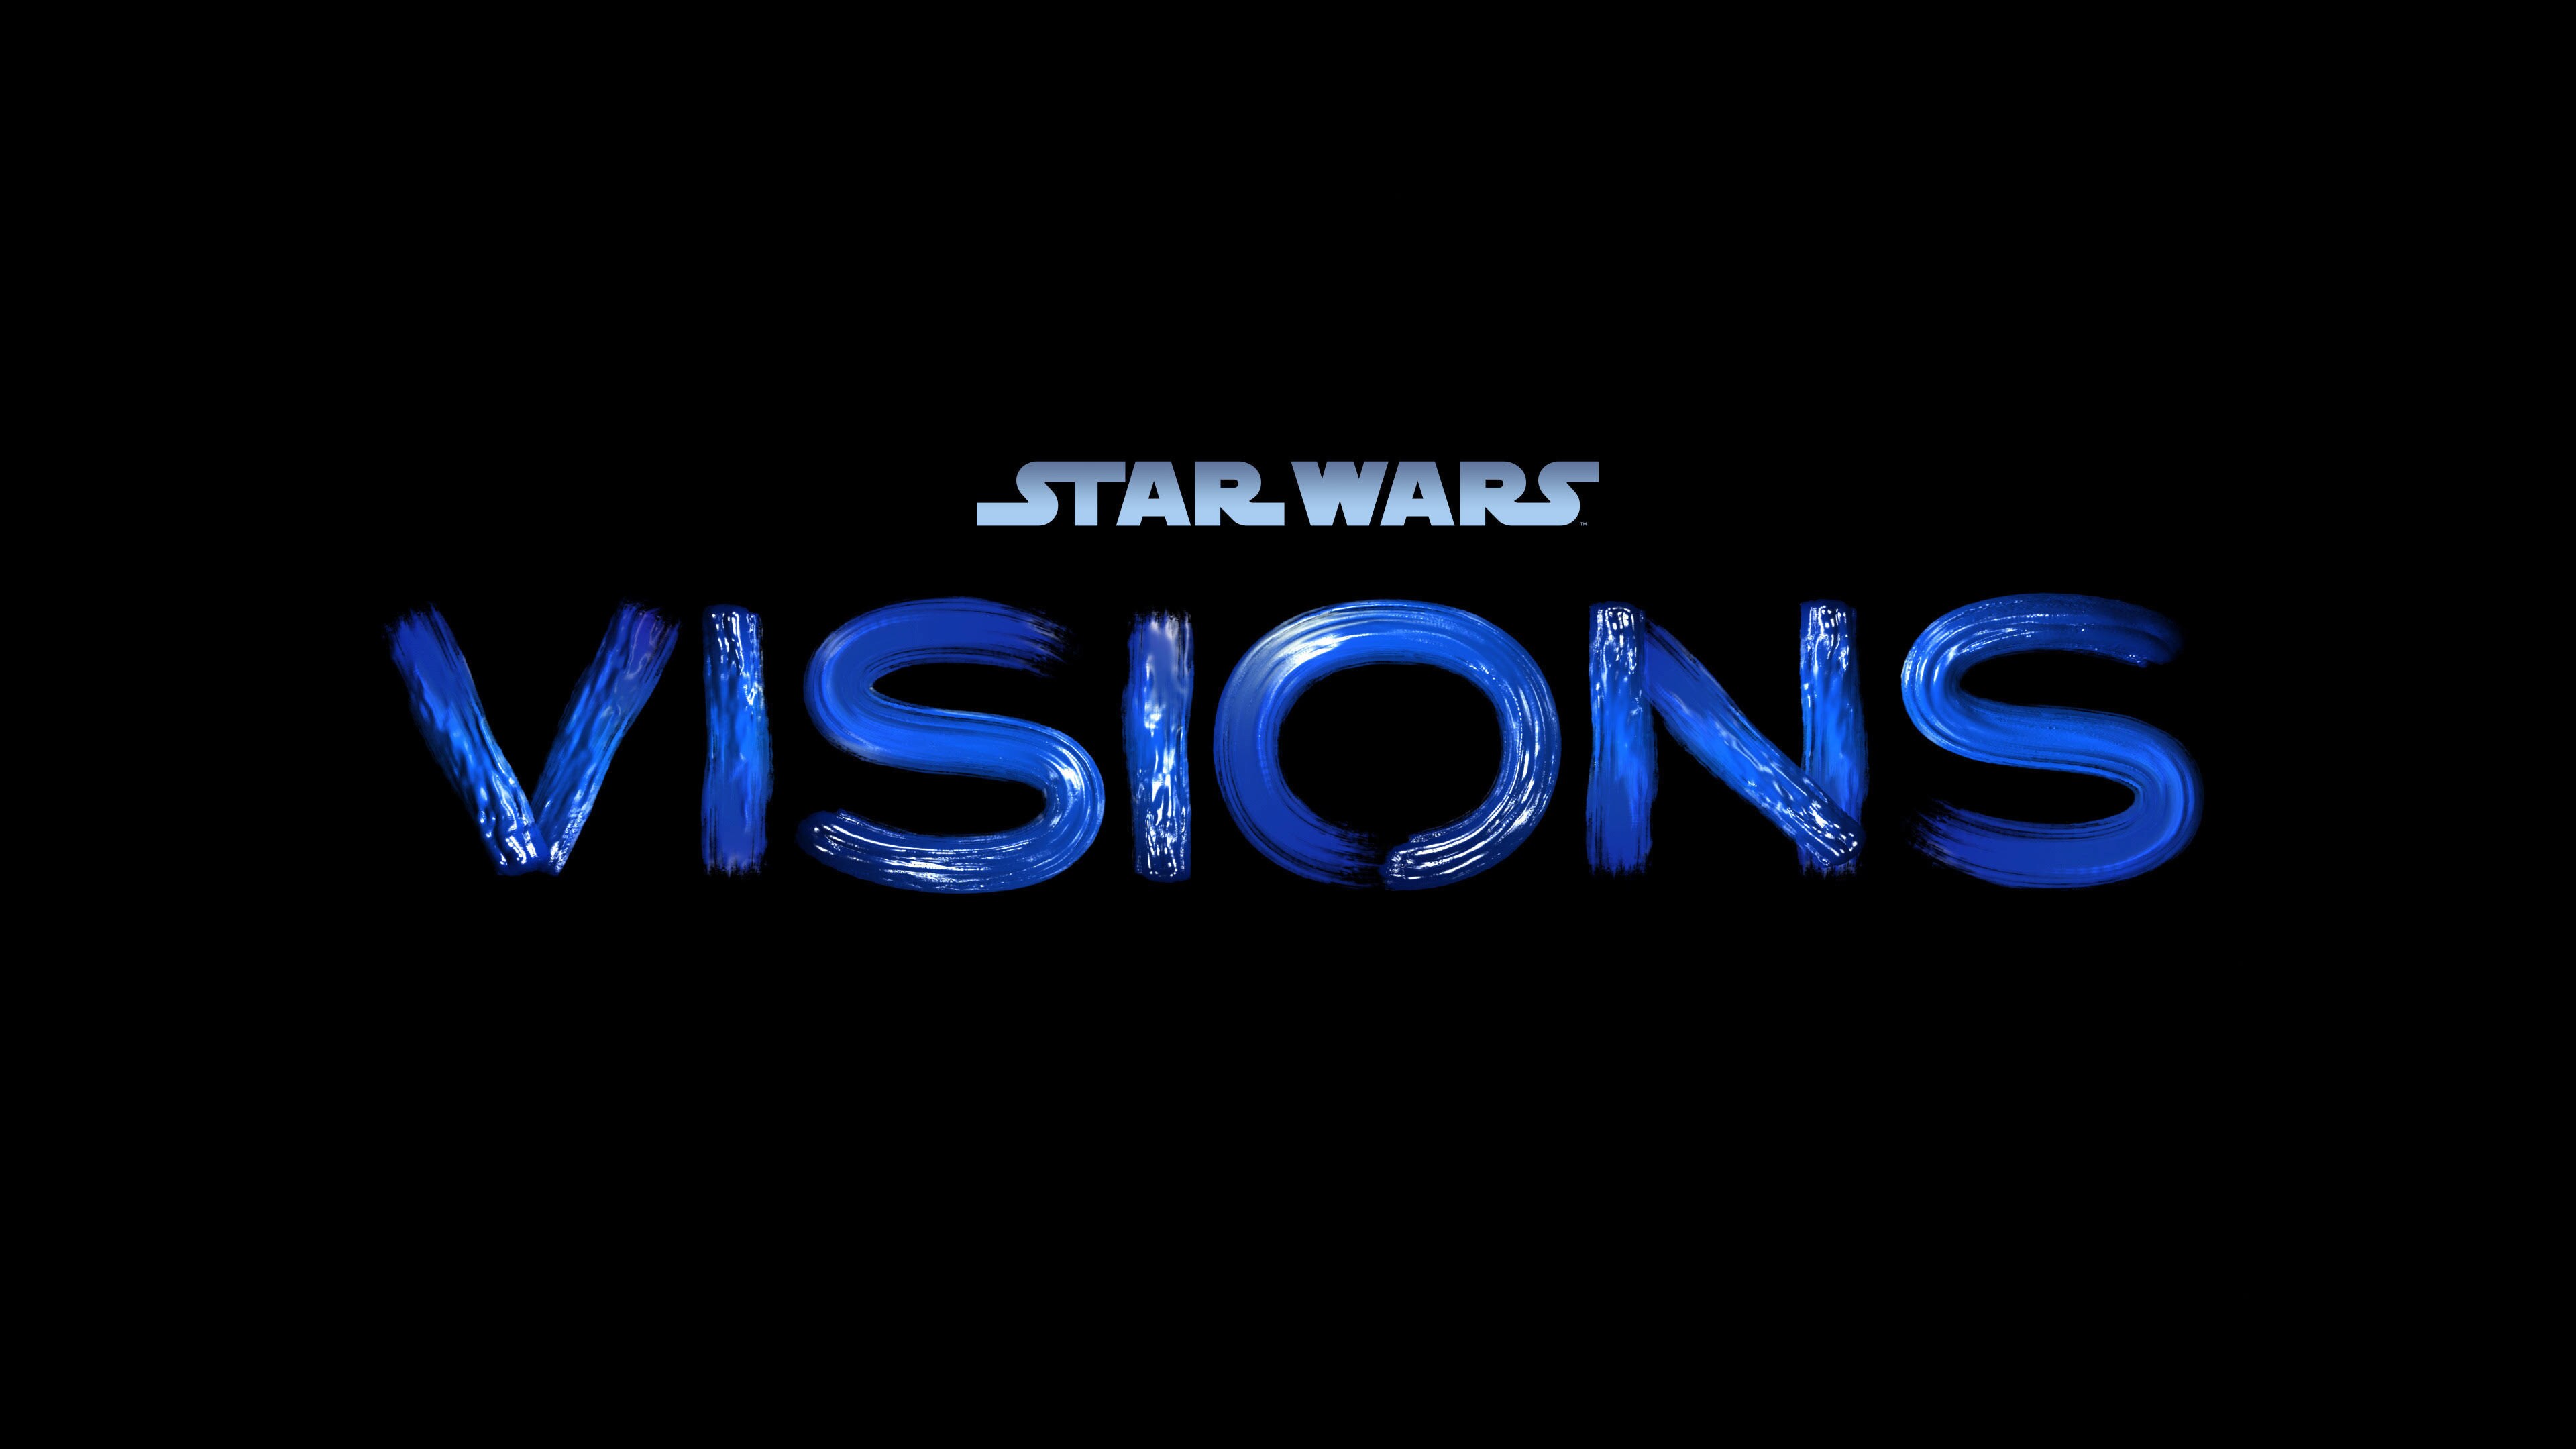 Disney+ Debuts Trailer & Announces Cast For “Star Wars: Visions”